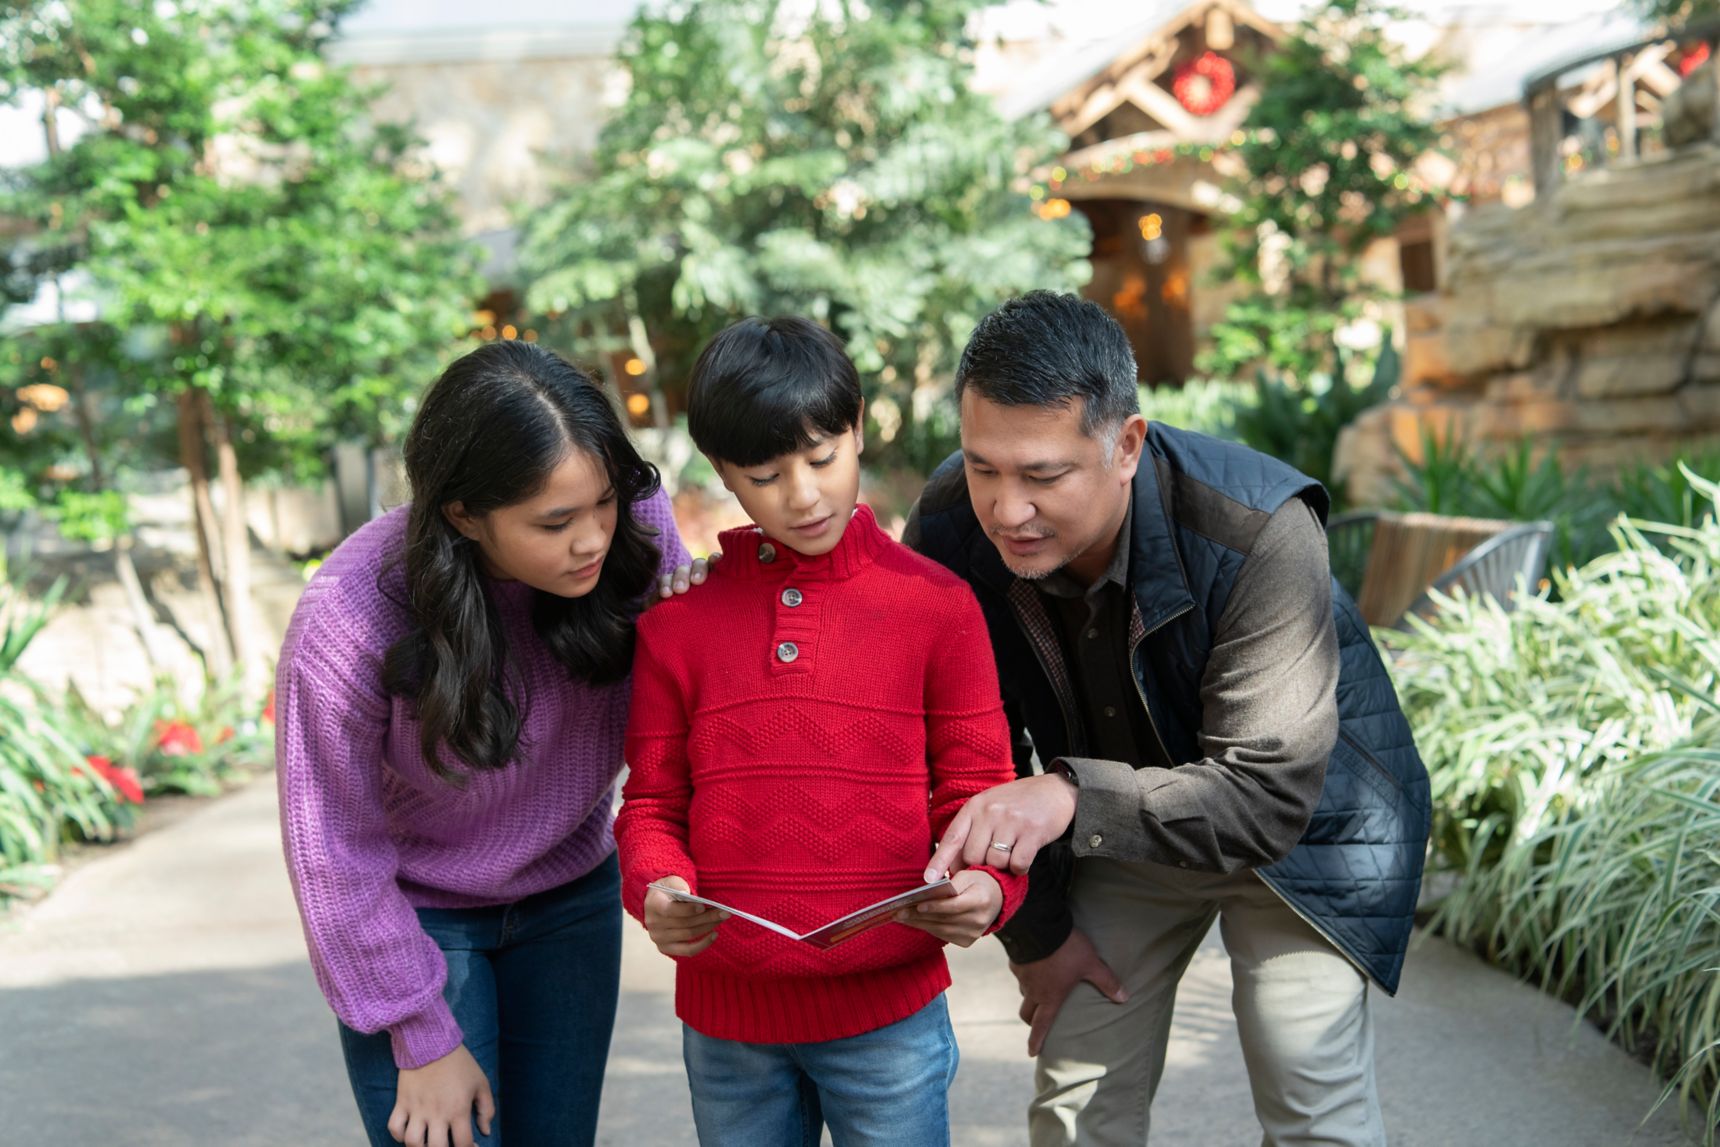 Spring-A-Long Scavenger Hunt, a spring activity for kids at Gaylord National Resort in National Harbor. Photo Credit Gaylord National Resort